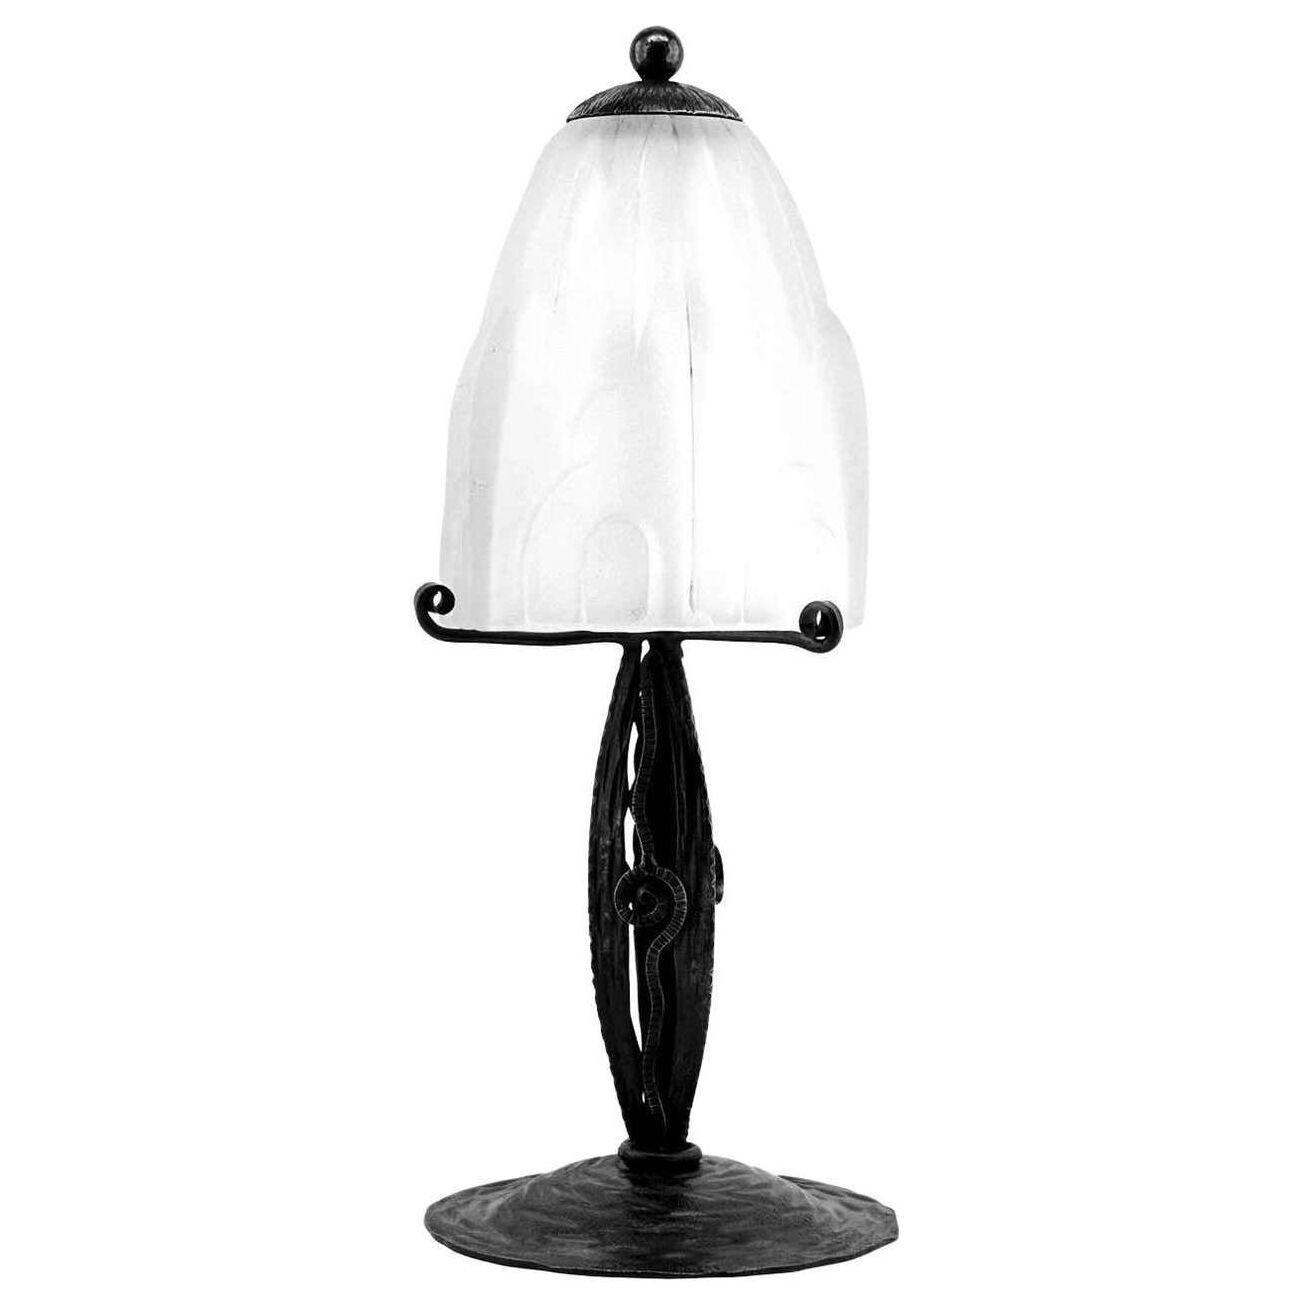 Edouard Cazaux at Degue's French Art Deco Table Lamp, 1928-1930